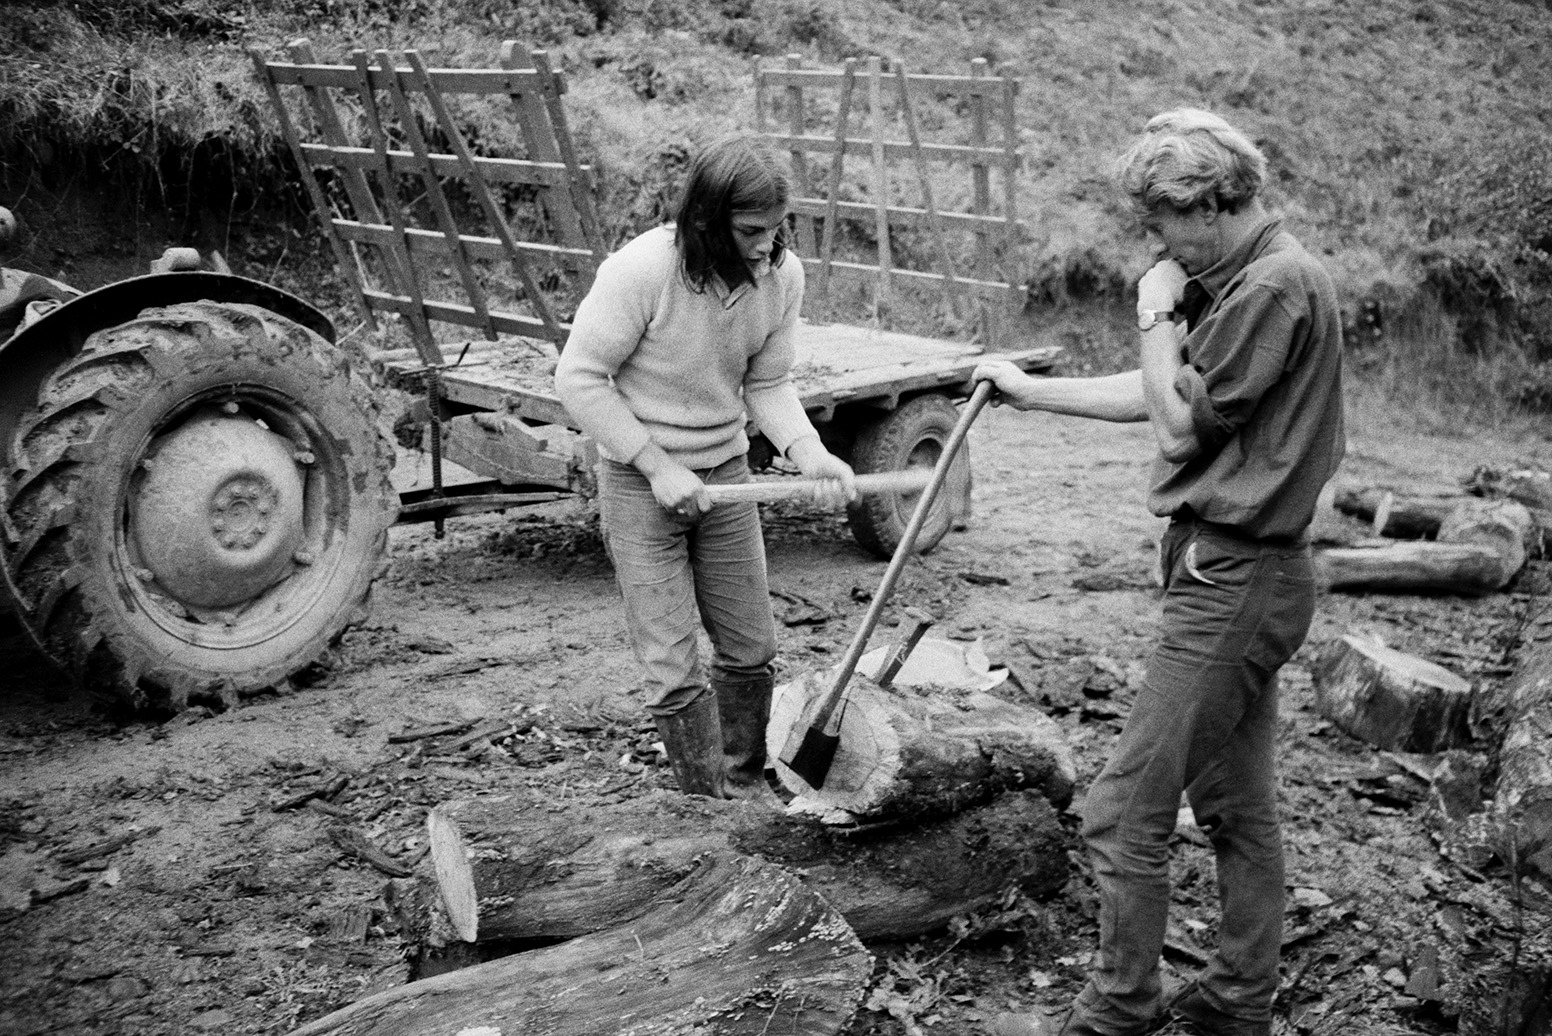 Derek Bright, on the left, helping Ivor Bourne split logs using an axe, wedges and hammer, at Mill Road Farm, Beaford. A tractor and trailer can be seen in the background. The farm was also known as Jeffrys.